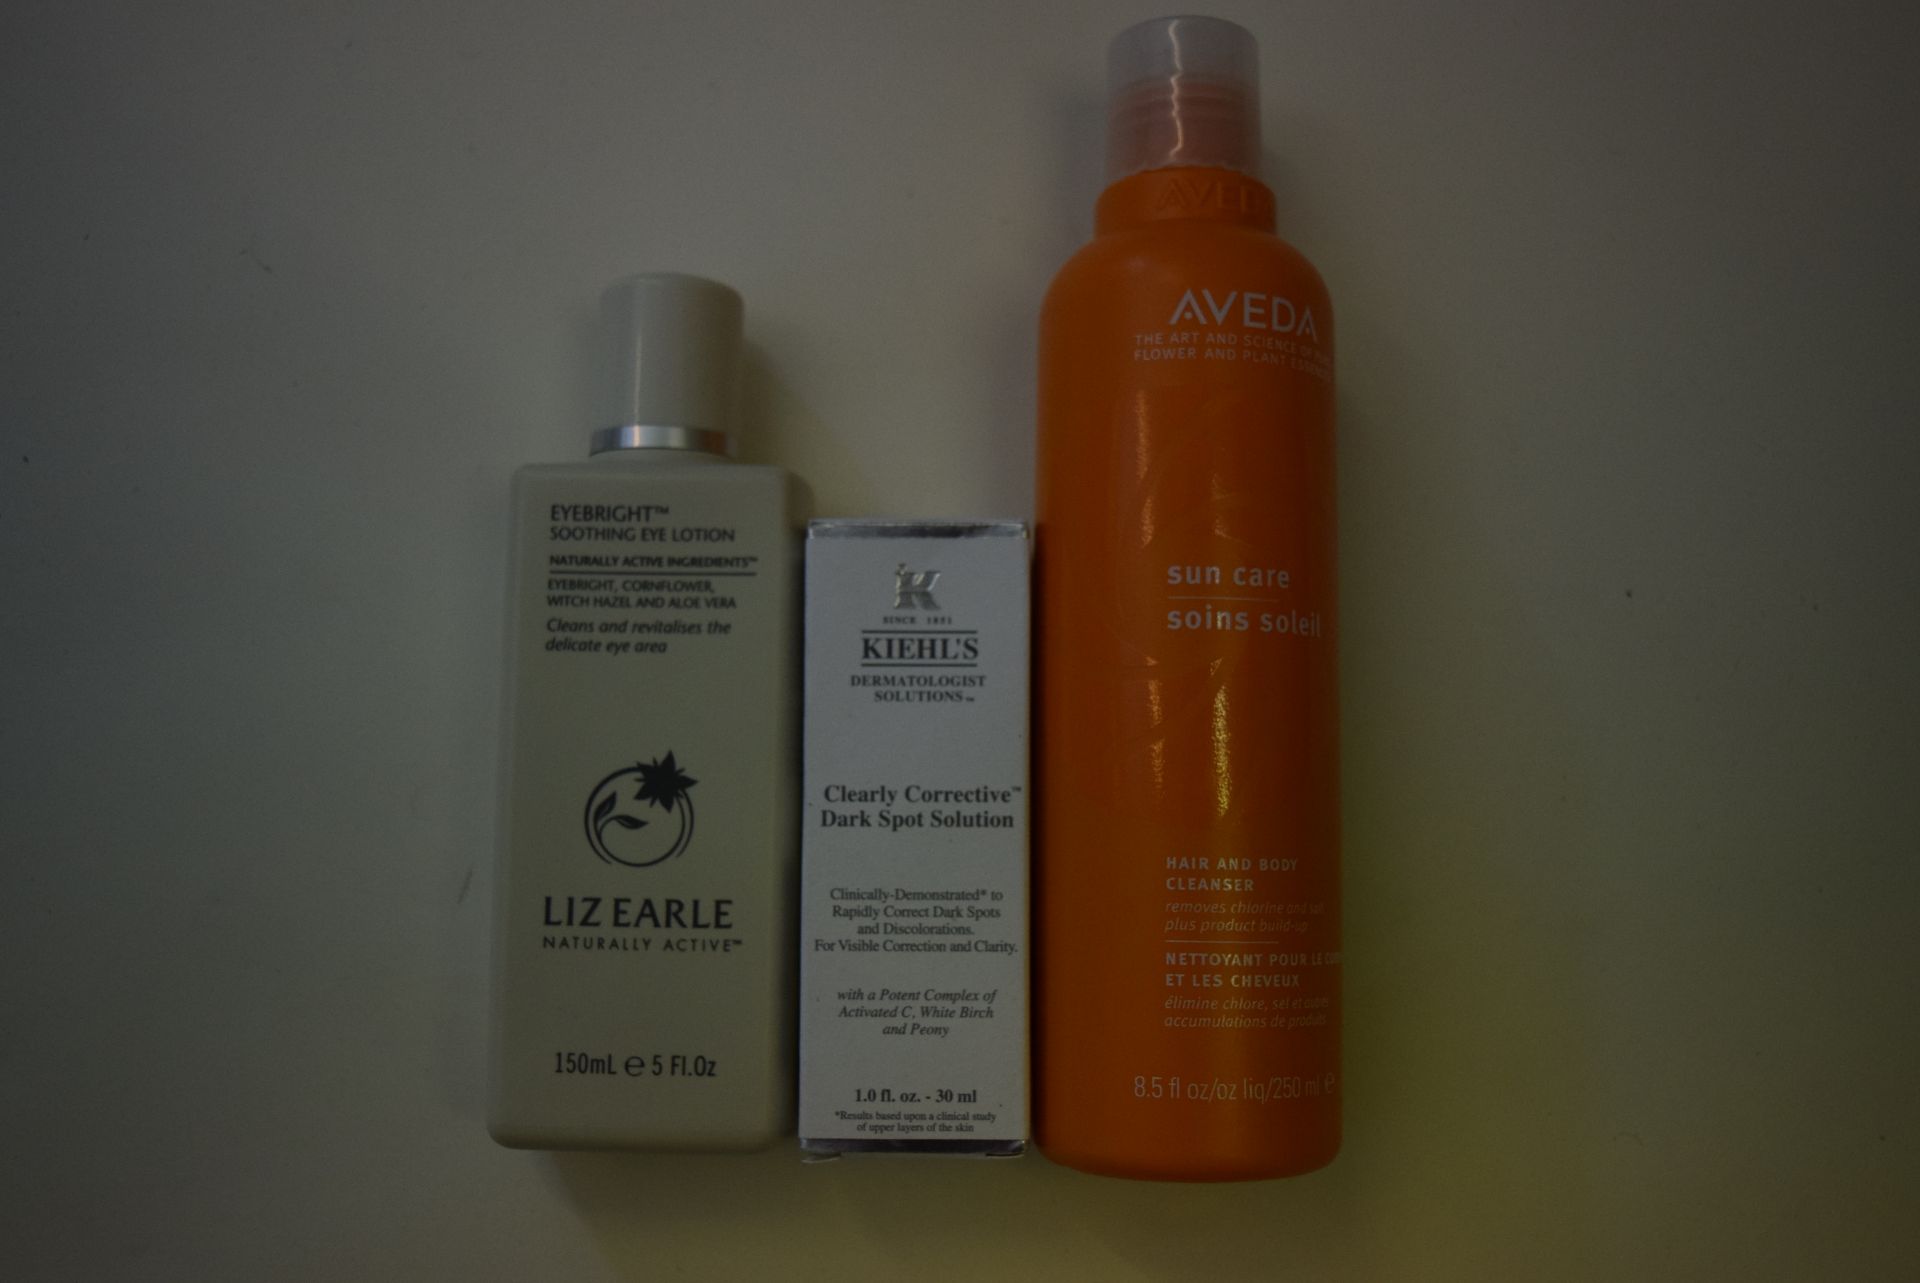 3 X ITEMS TO INCLUDE KEIHLS CLEARLY CORRECTIVE DARK SPOT SOLUTION, LIZ EARLE EYE BRIGHT SOOTHING